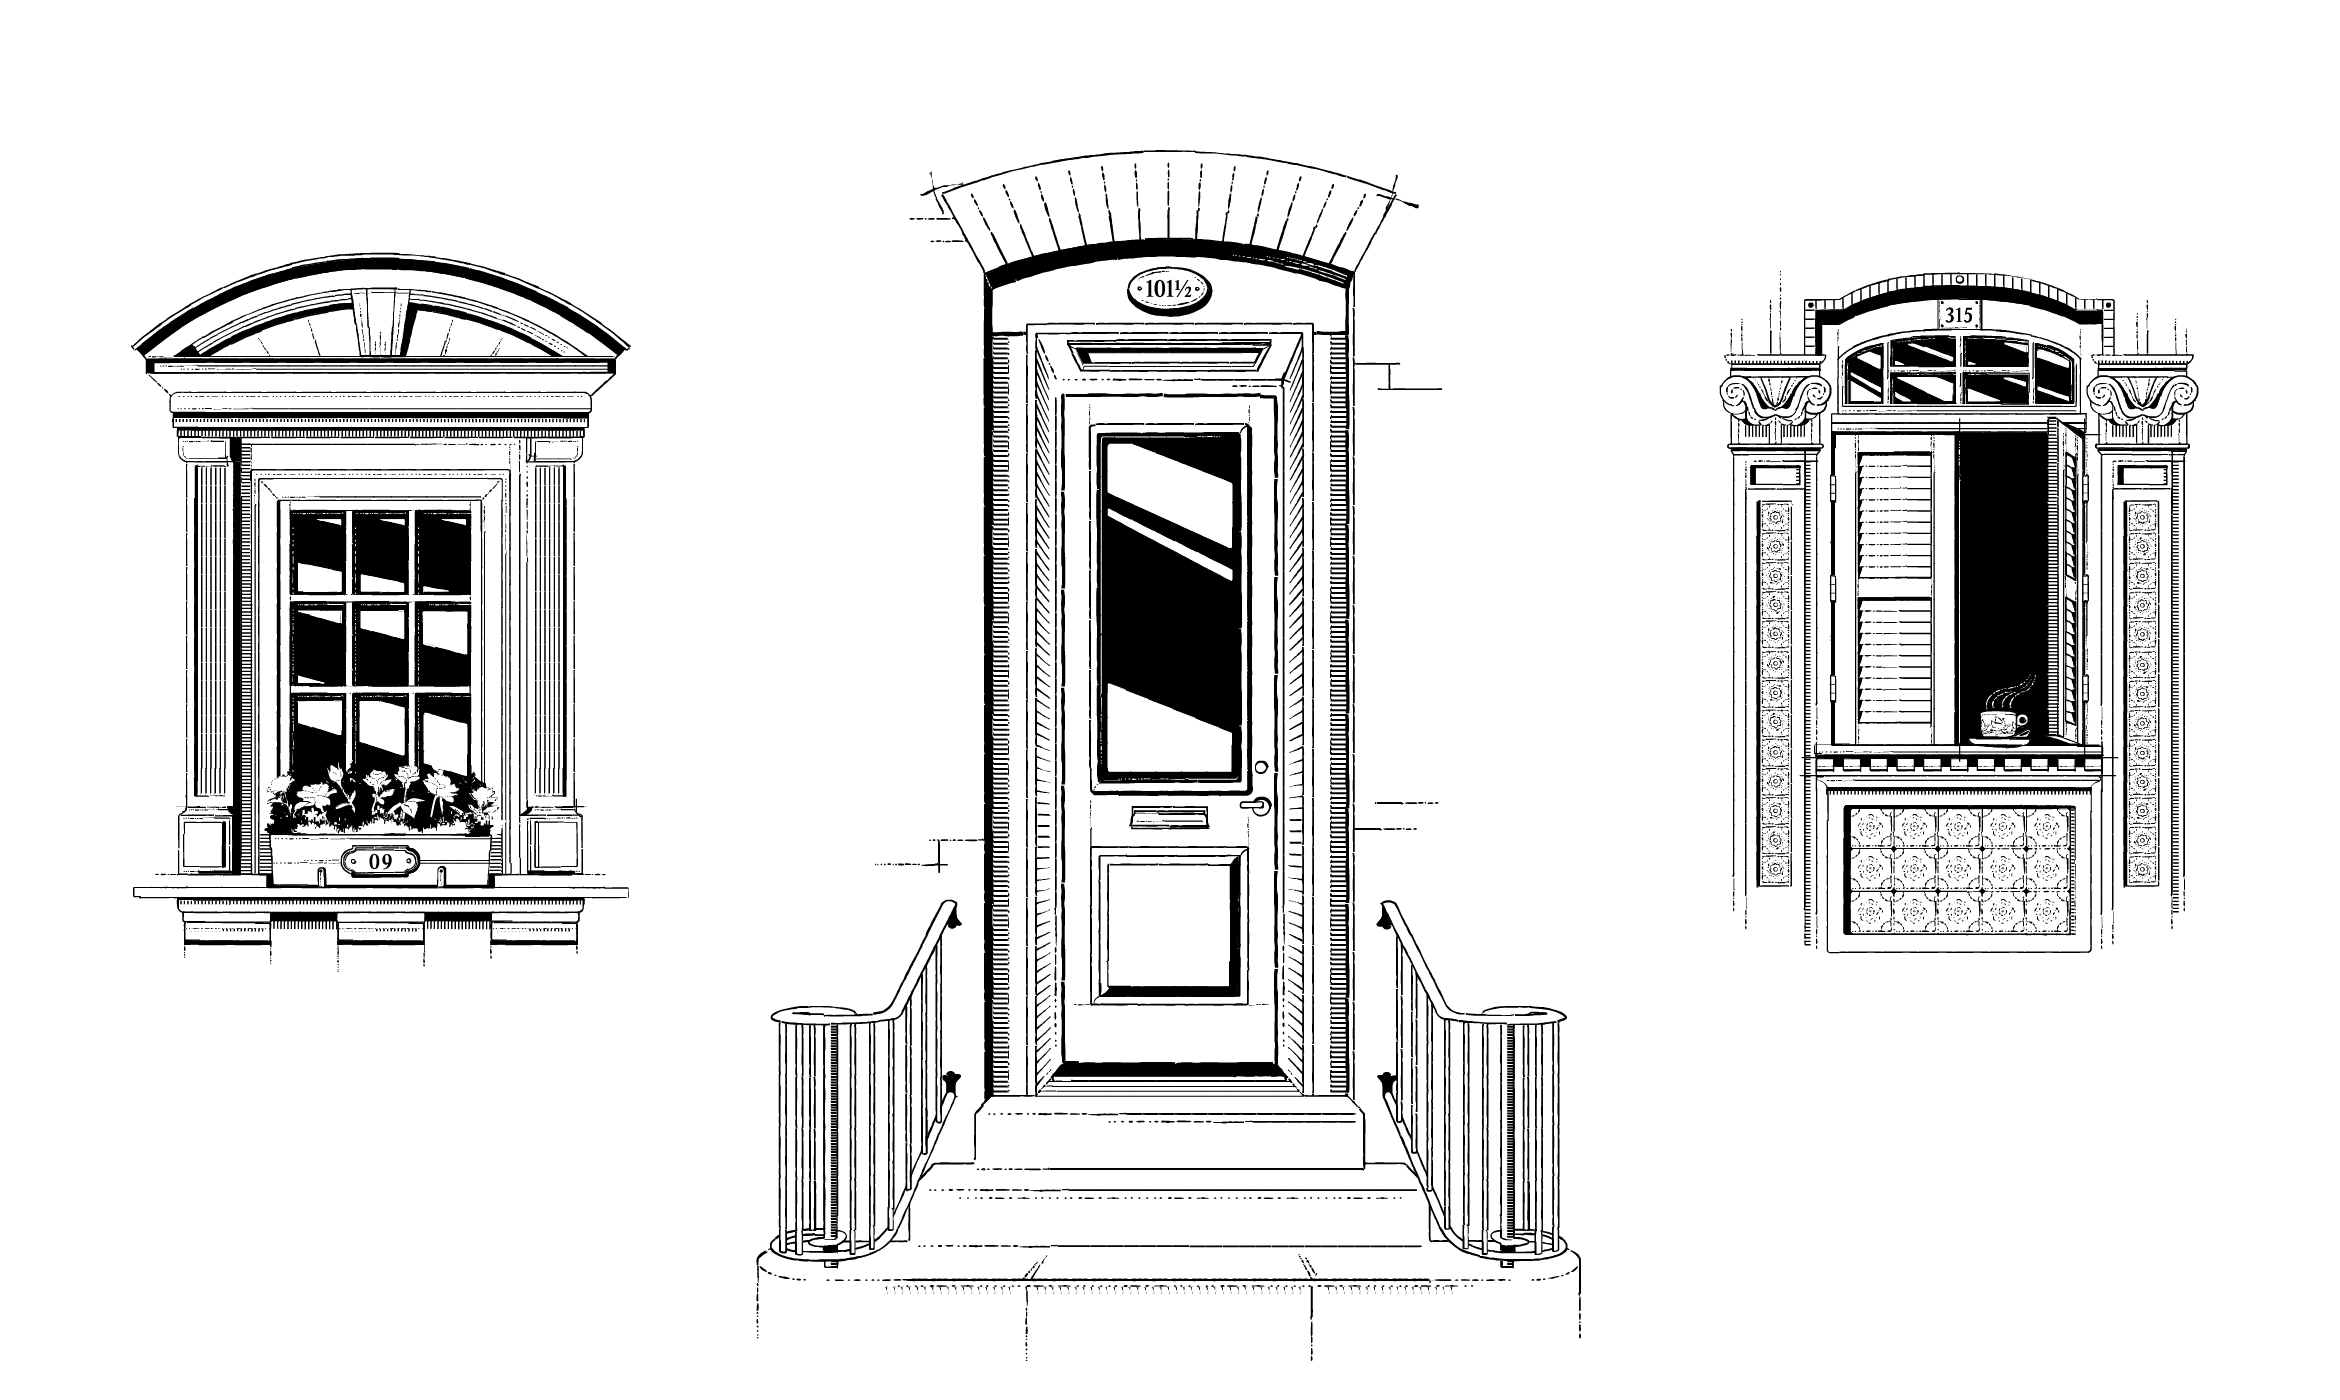 A black-and-white illustration features three classic architectural elements: on the left, a large arched window with flower boxes; in the middle, a detailed door with side railings; on the right, a narrower window with intricate decorative designs.